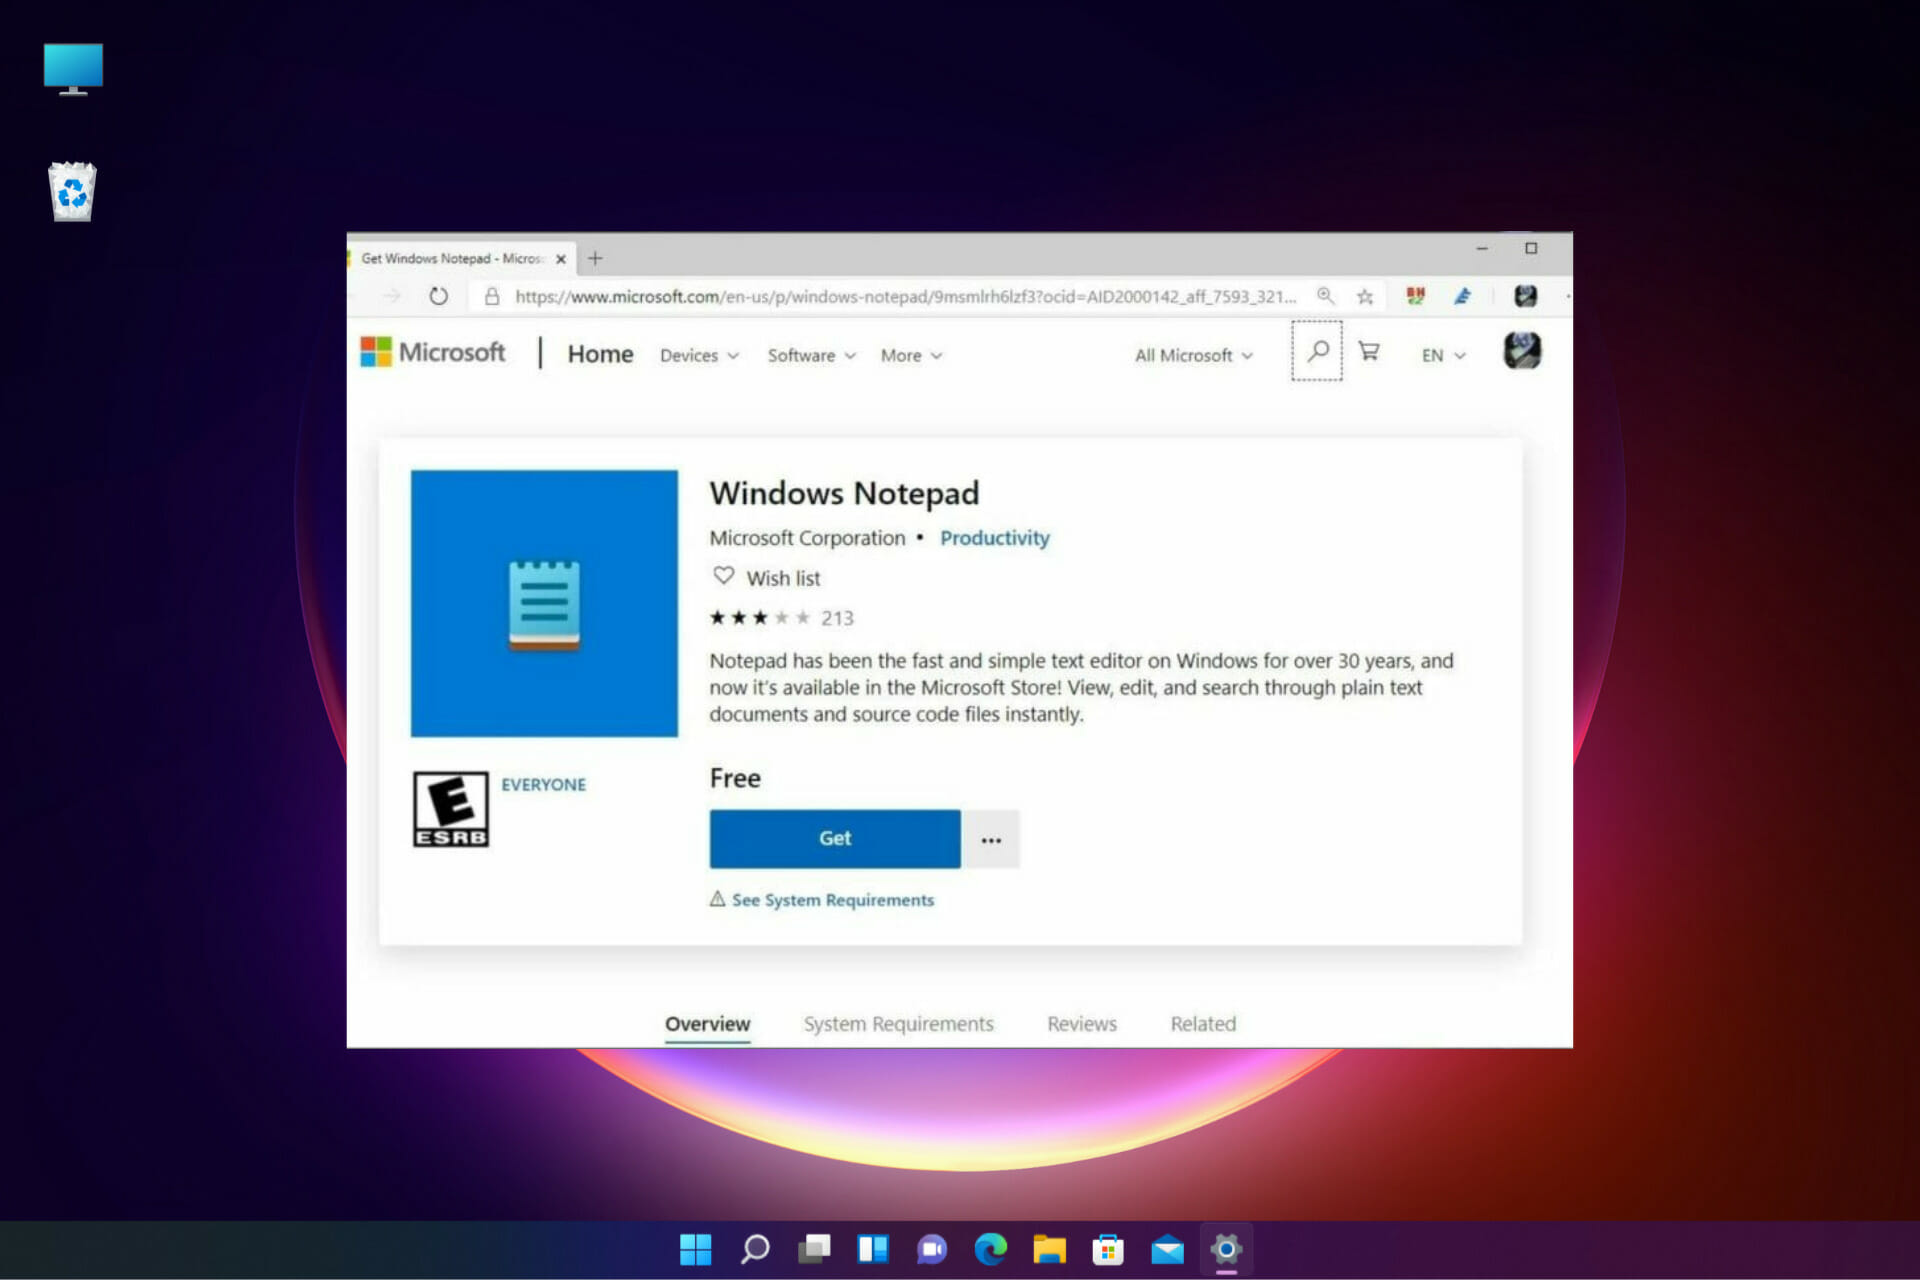 There will be a new Notepad app Windows 11